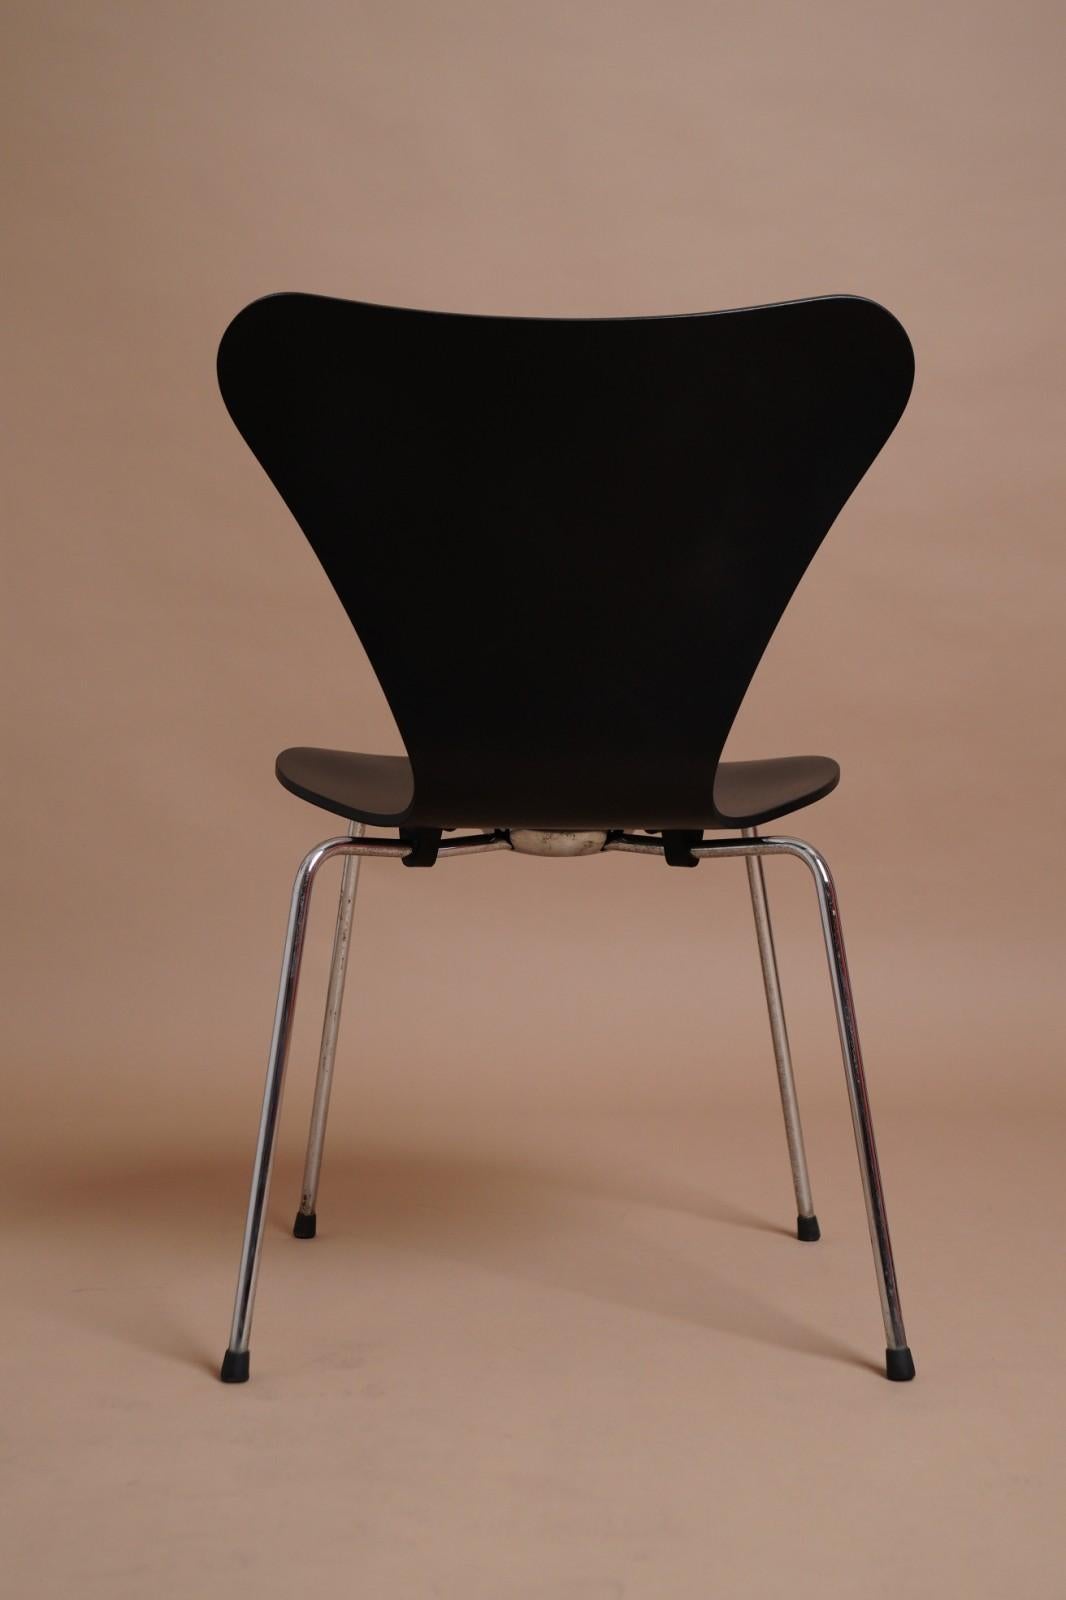 Series 7 By Arne Jacobsen Chair For Fritz Hansen 1960ss In Good Condition For Sale In Čelinac, BA